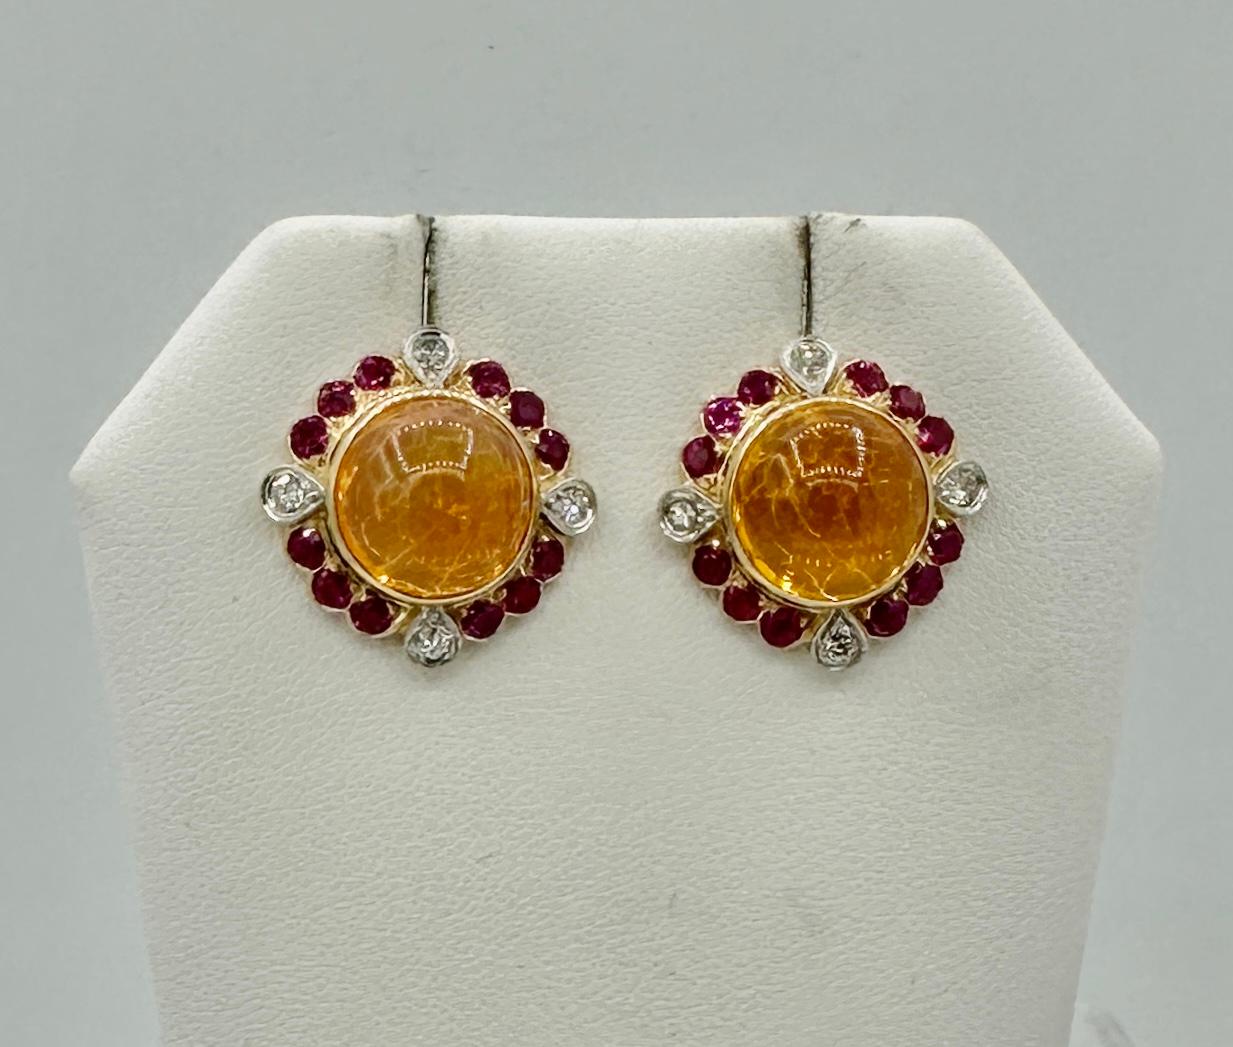 11 Carat Mexican Fire Opal Ruby Diamond Earrings 14 Karat Gold Art Deco Retro In Excellent Condition For Sale In New York, NY